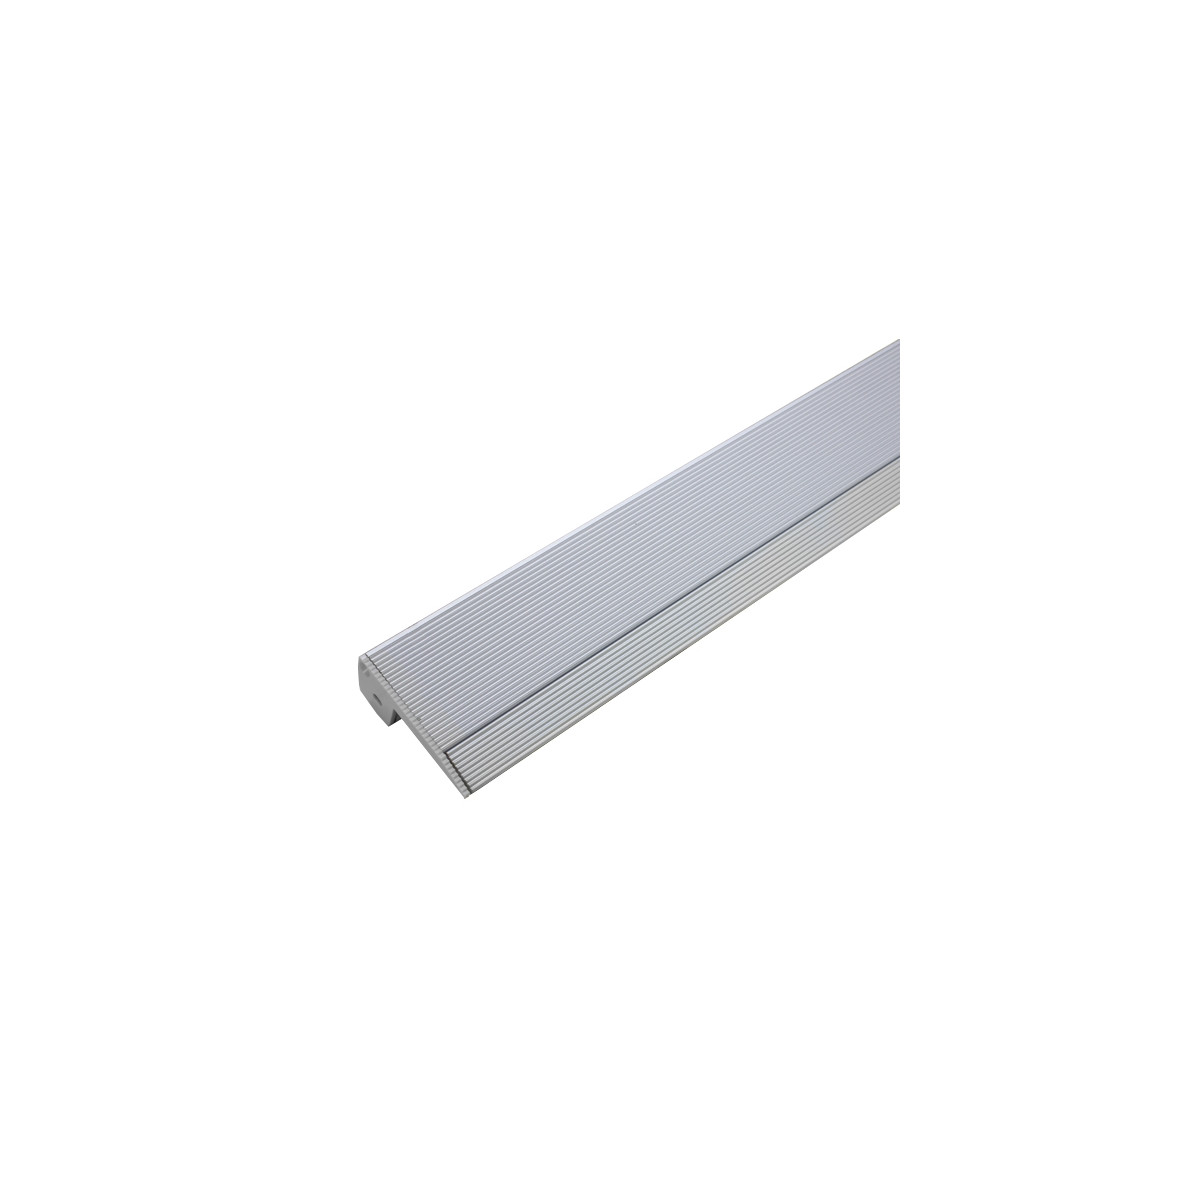 Aluminum profile led strip for stairs